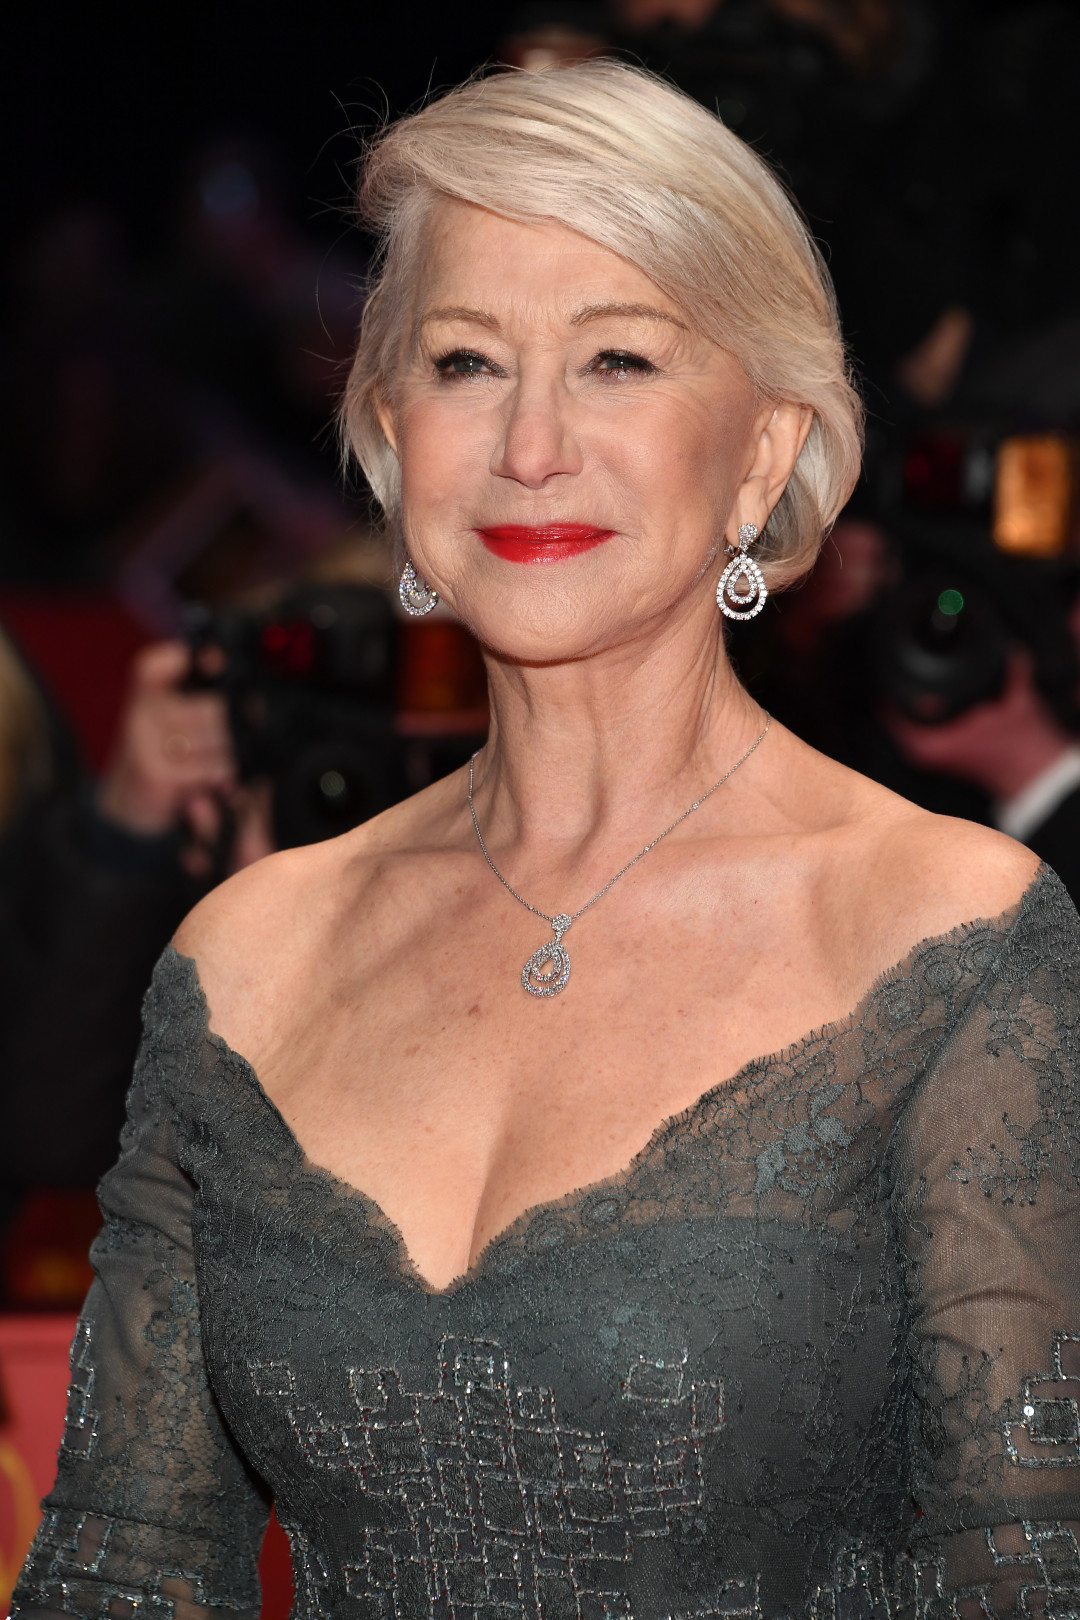 These actresses are in their 70s and beyond